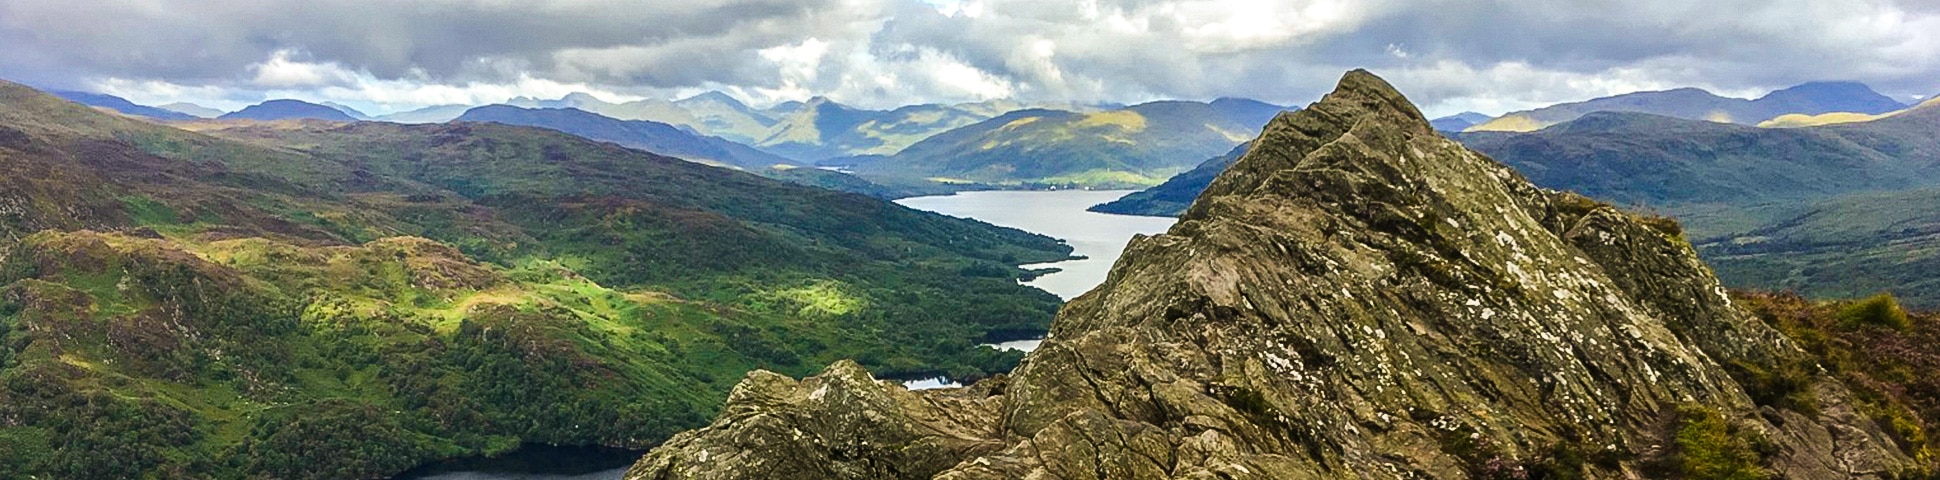 Panorama on Ben A'an hike in Loch Lomond and The Trossachs area in Scotland